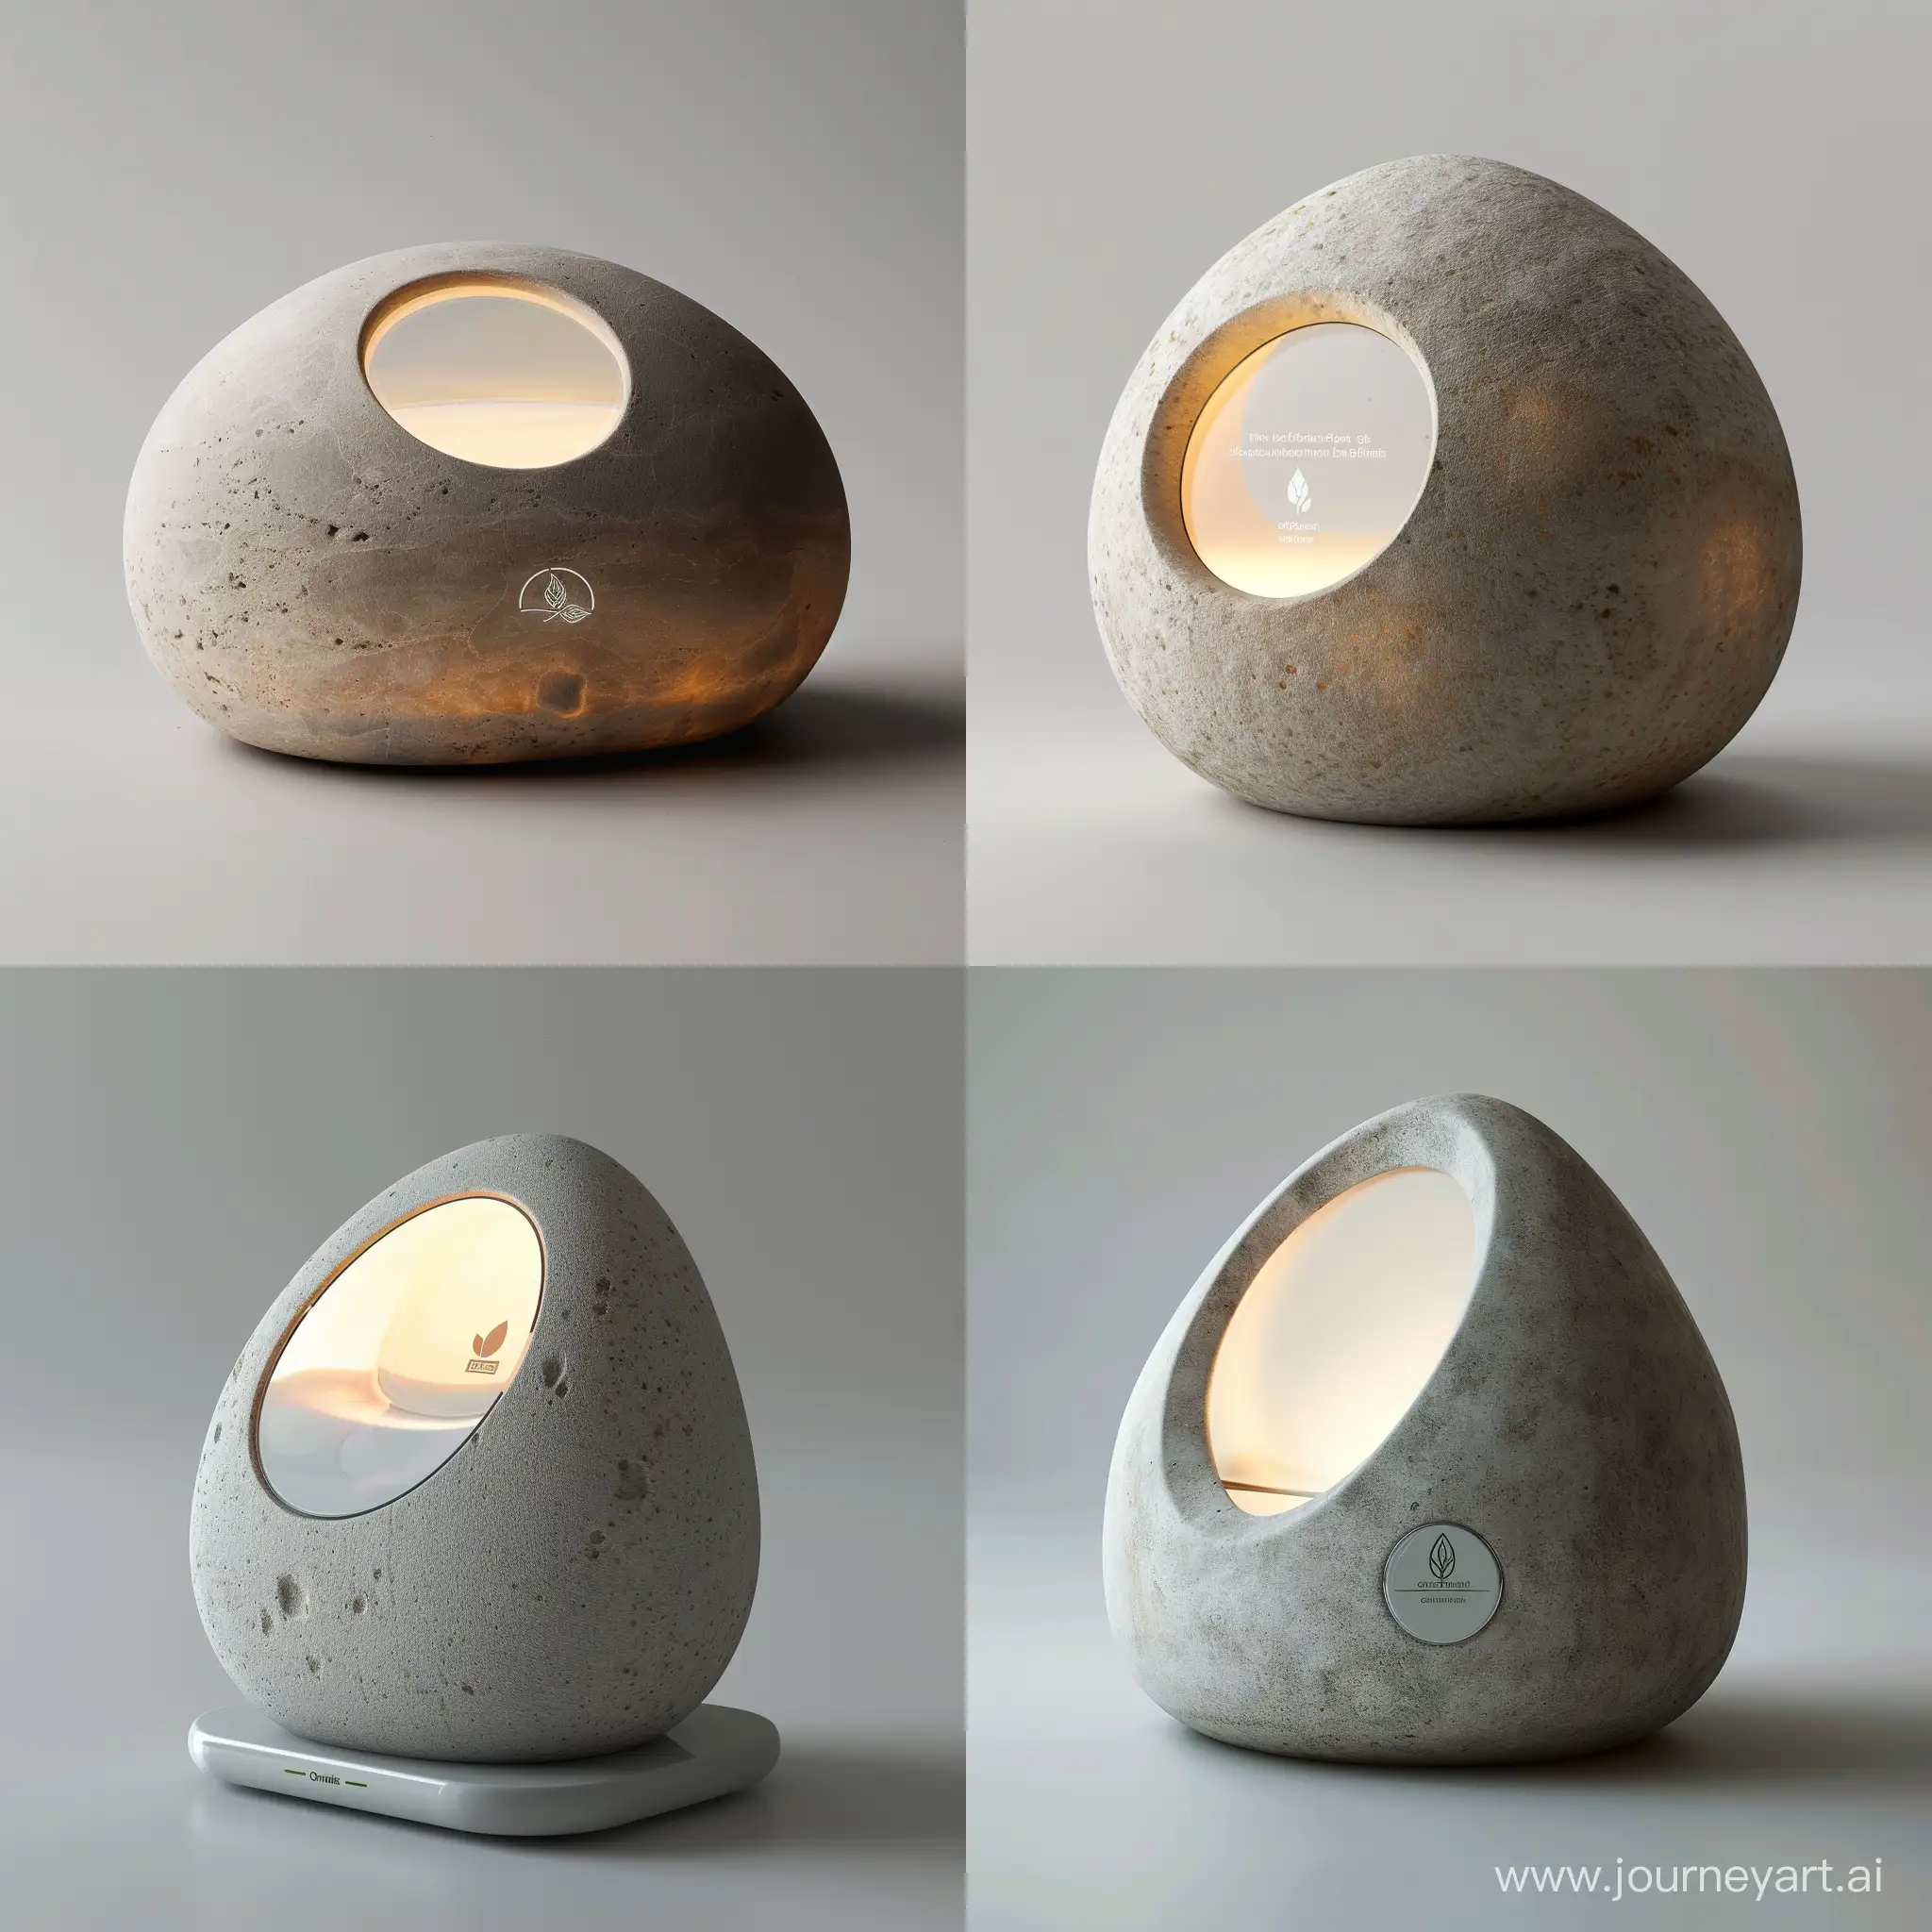 imagine : The Living Pebble
Structure:A smooth, pebble-shaped form with a slightly flattened base for stability.
A small, circular cutout on the top surface allows for light emission.
Form:Organic and natural, resembling a polished pebble.
The cutout creates a subtle visual interest and allows light to shine through.
Shape:Irregular, rounded pebble-like shape.
Circular cutout.
Material:Recycled glass or sustainably sourced bamboo.The cutout could be filled with a translucent material like frosted glass or acrylic to diffuse the light.
Color:Soft, natural colors like white, light grey, or beige to blend with various home decor styles.The light can be a warm, calming glow emanating from the cutout, potentially changing color based on energy consumption (green for efficient, red for high usage).
Logo:A subtle logo can be etched or printed on the base of the pebble, depicting a leaf or other symbol representing sustainability.
Lighting:Embedded LEDs within the main body illuminate the cutout, creating the soft glow.
The light intensity and color can adjust based on real-time energy consumption, providing visual feedback.
Dimensions:Diameter: Approximately 5-7 cm.
Height: Slightly shorter than the diameter to maintain a pebble-like profile.
Additional Notes:The surface finish can be smooth or textured, depending on the chosen material.Consider incorporating touch-sensitive areas on the surface for basic interaction like accessing data or adjusting settings.realistic style